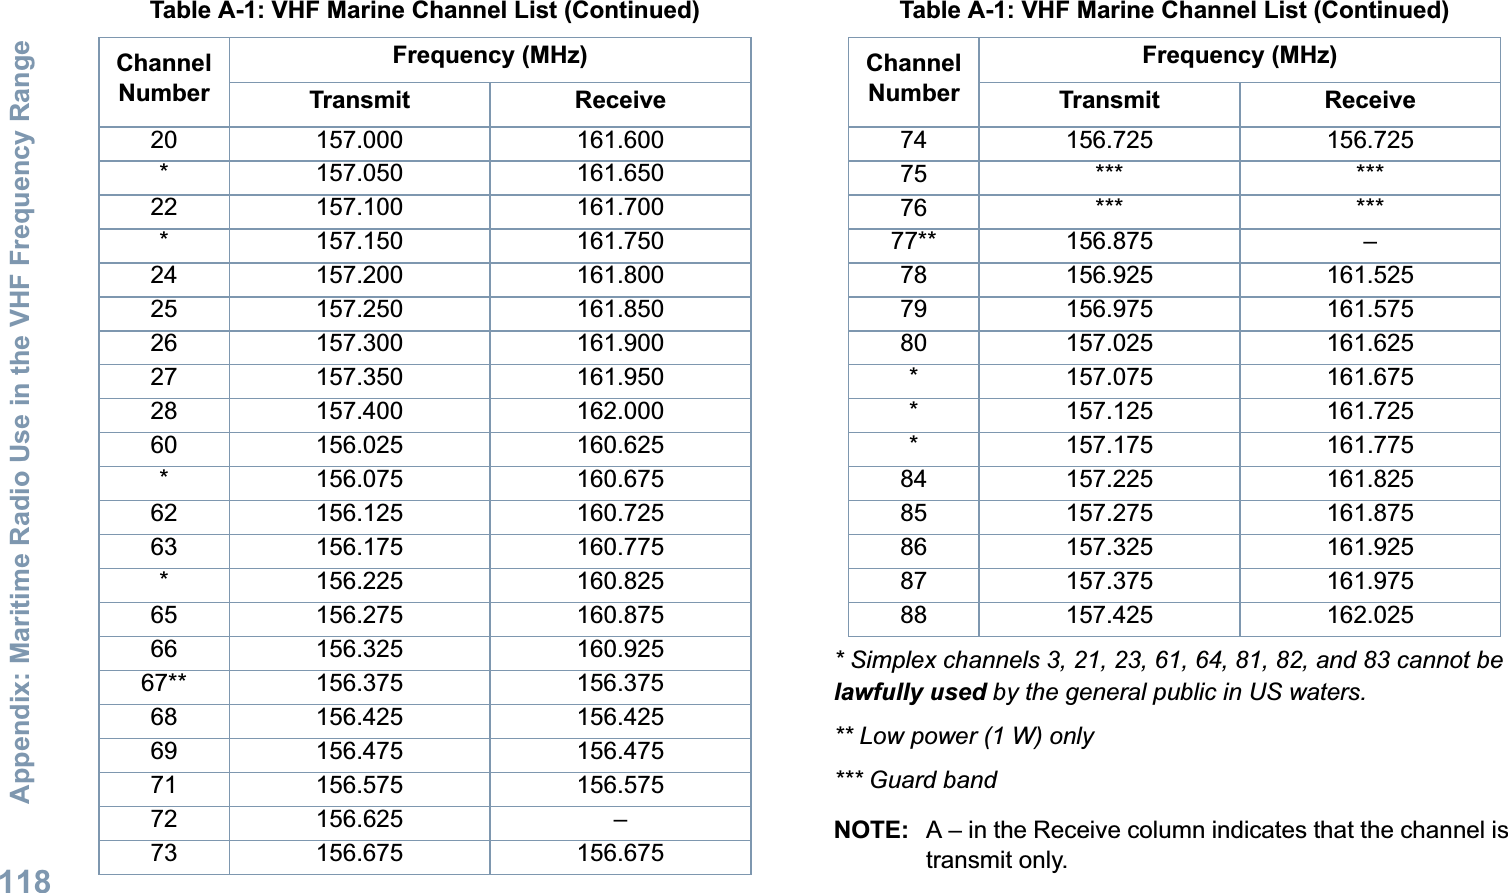 Appendix: Maritime Radio Use in the VHF Frequency RangeEnglish118* Simplex channels 3, 21, 23, 61, 64, 81, 82, and 83 cannot be lawfully used by the general public in US waters.** Low power (1 W) only*** Guard bandNOTE: A – in the Receive column indicates that the channel is transmit only.20 157.000 161.600* 157.050 161.65022 157.100 161.700* 157.150 161.75024 157.200 161.80025 157.250 161.85026 157.300 161.90027 157.350 161.95028 157.400 162.00060 156.025 160.625* 156.075 160.67562 156.125 160.72563 156.175 160.775* 156.225 160.82565 156.275 160.87566 156.325 160.92567** 156.375 156.37568 156.425 156.42569 156.475 156.47571 156.575 156.57572 156.625 –73 156.675 156.675Table A-1: VHF Marine Channel List (Continued)Channel NumberFrequency (MHz)Transmit Receive74 156.725 156.72575 *** ***76 *** ***77** 156.875 –78 156.925 161.52579 156.975 161.57580 157.025 161.625* 157.075 161.675* 157.125 161.725* 157.175 161.77584 157.225 161.82585 157.275 161.87586 157.325 161.92587 157.375 161.97588 157.425 162.025Table A-1: VHF Marine Channel List (Continued)Channel NumberFrequency (MHz)Transmit Receive